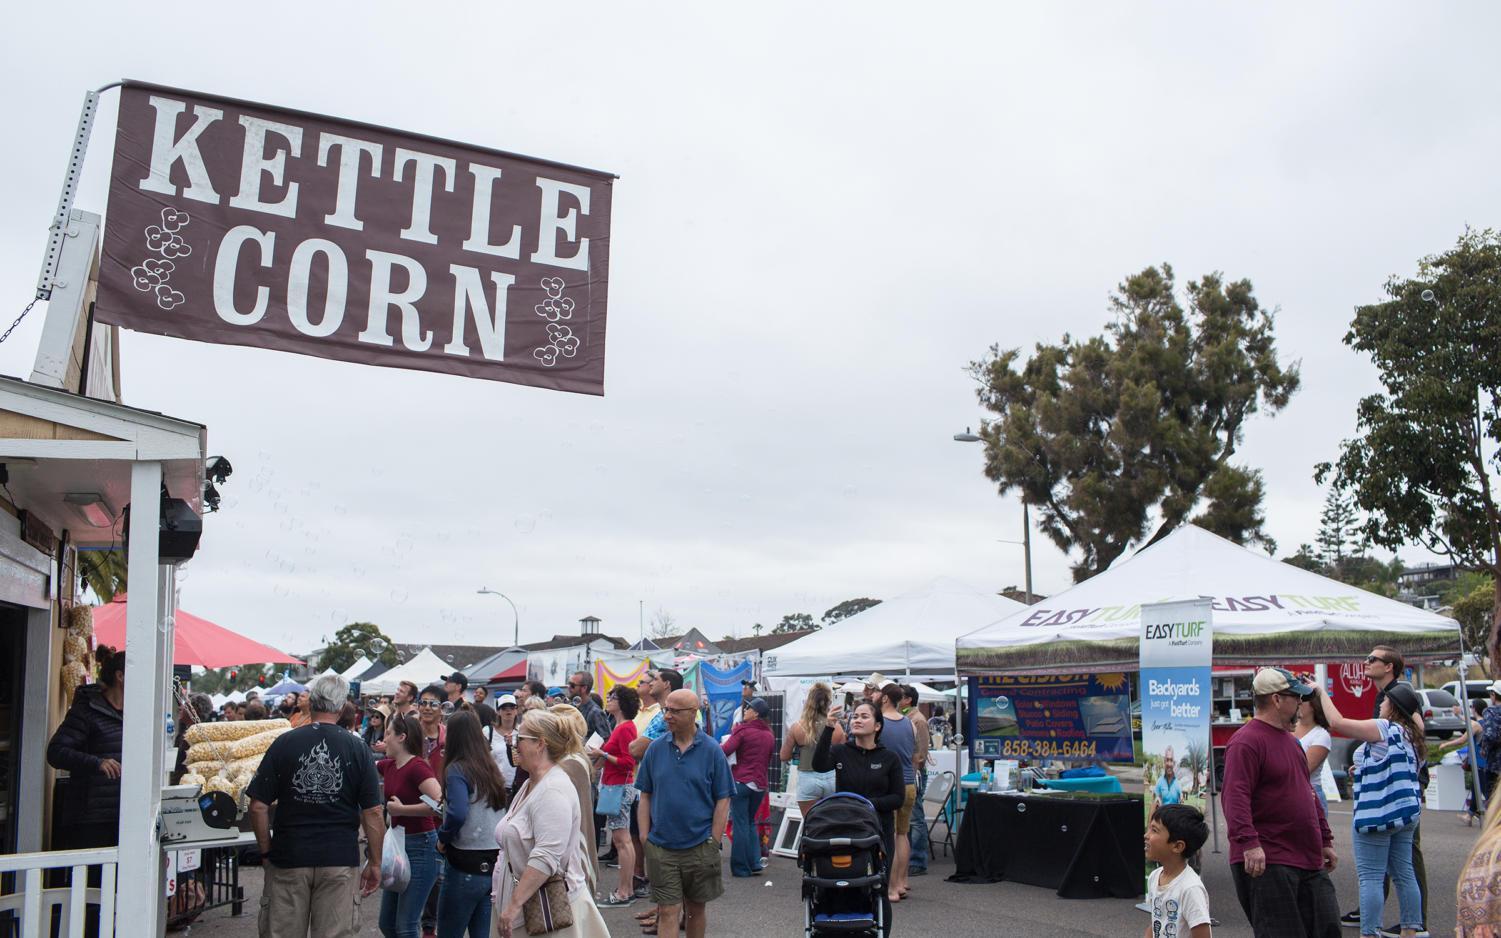 Street+Fair+snapshots%3A+Images+of+Encinitas+annual+spring+event